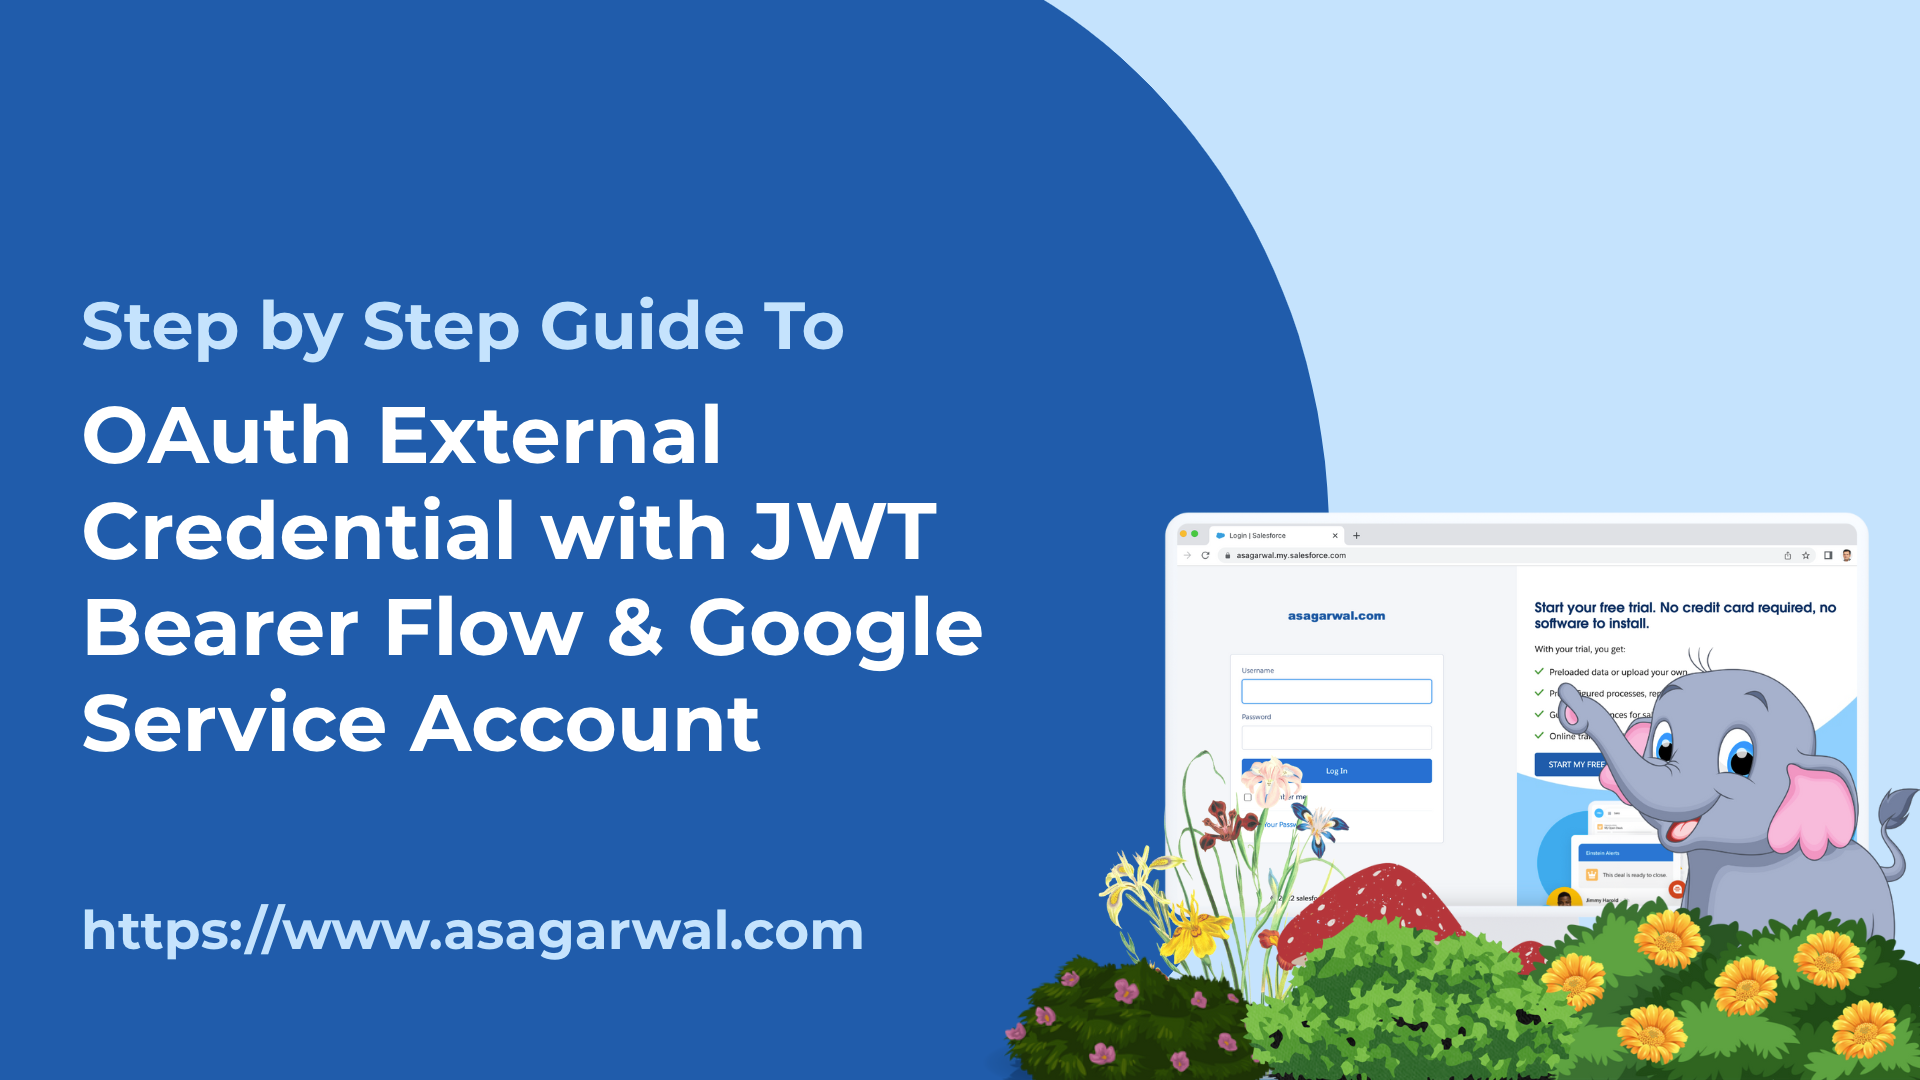 Step by Step Guide to OAuth External Credential with JWT Bearer Flow & Google Service Account